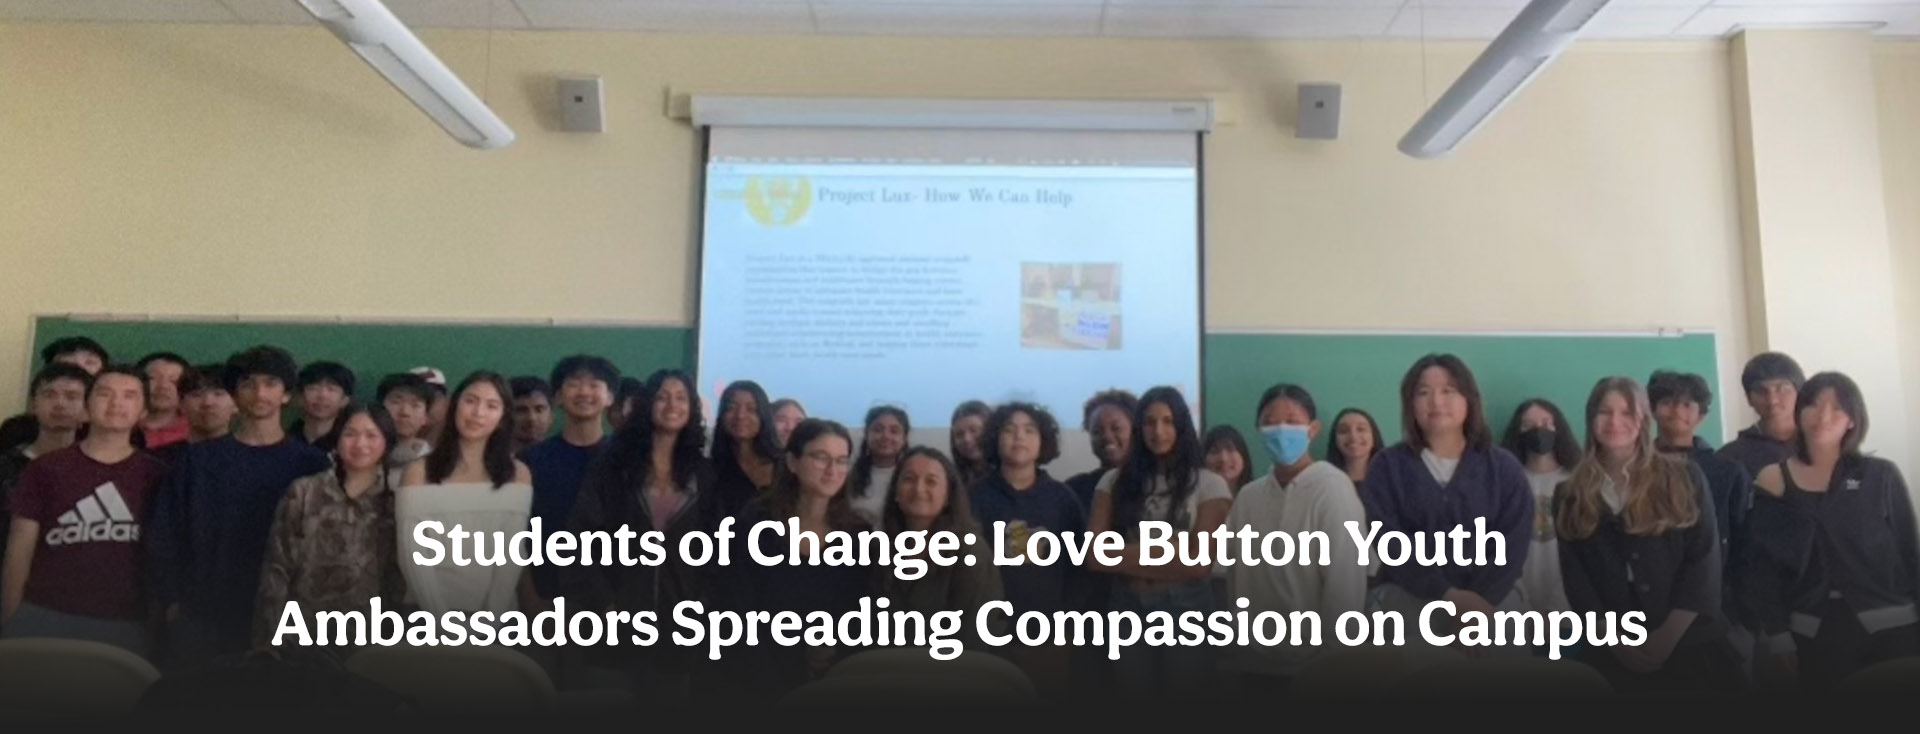 Students of Change: Love Button Youth Ambassadors Spreading Compassion on Campus